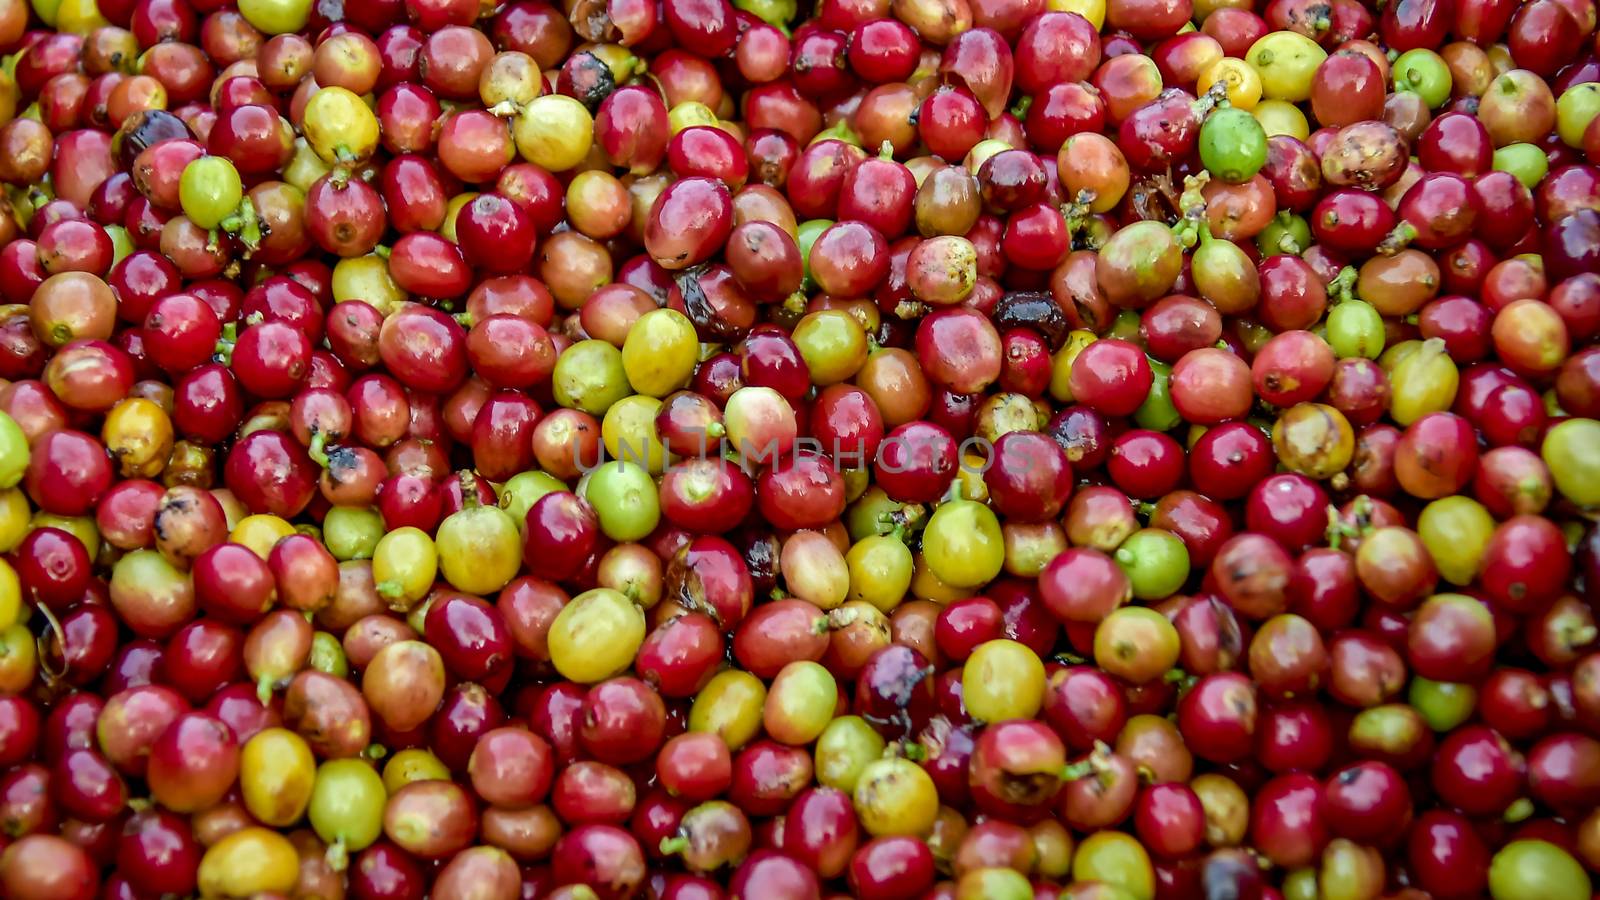 Raw coffee beans background, Close up fresh organic red raw and ripe coffee cherry beans.